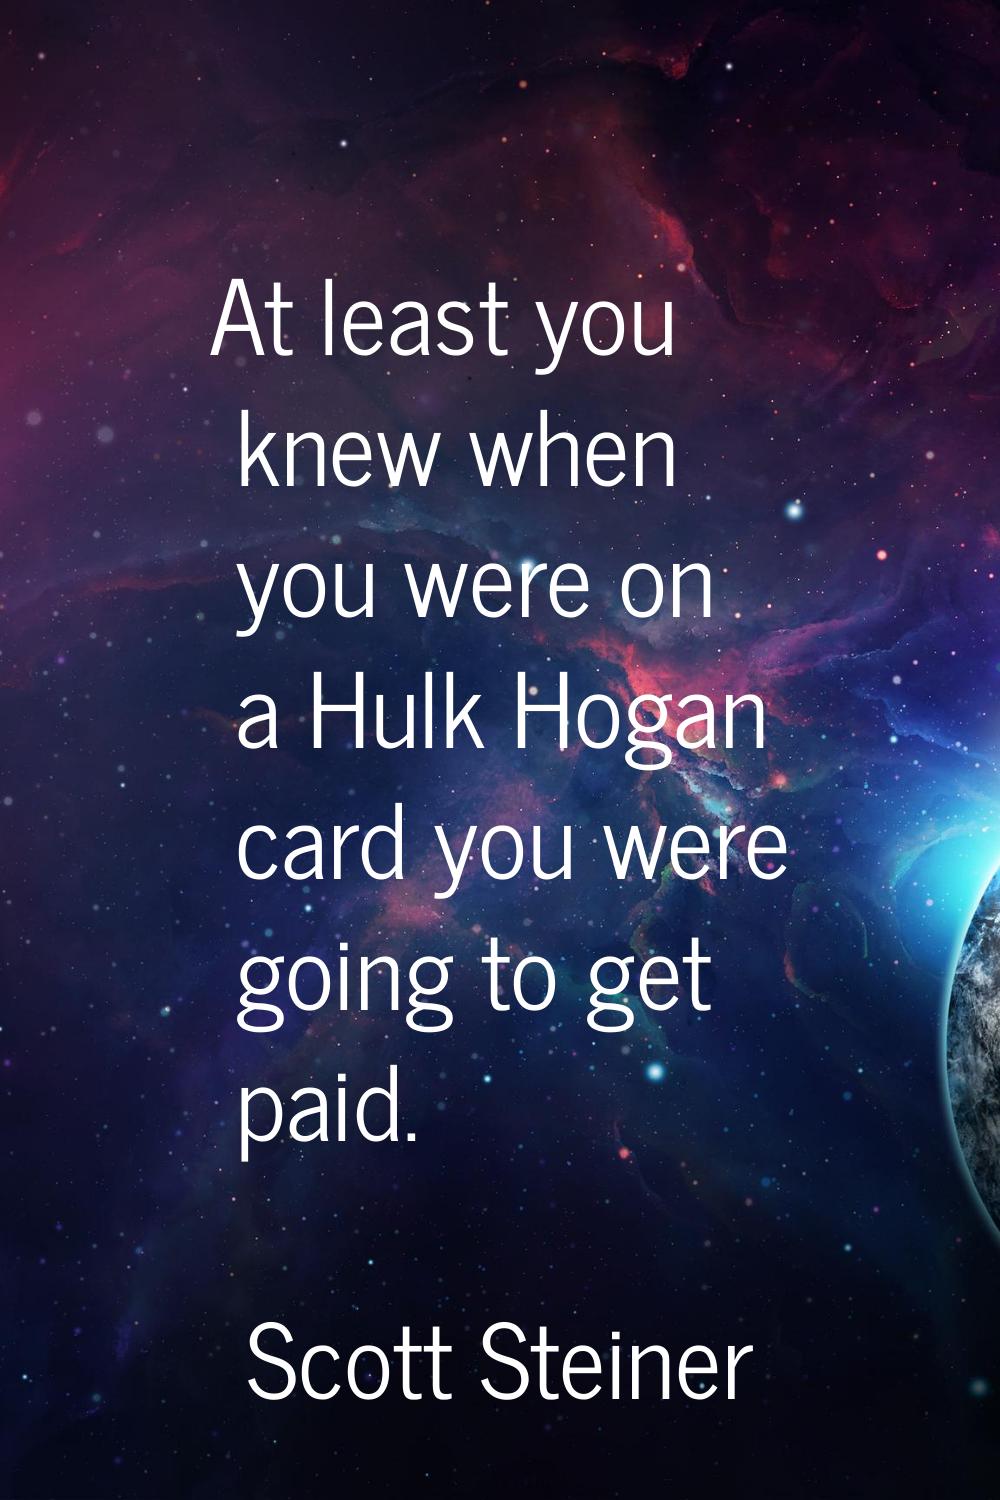 At least you knew when you were on a Hulk Hogan card you were going to get paid.